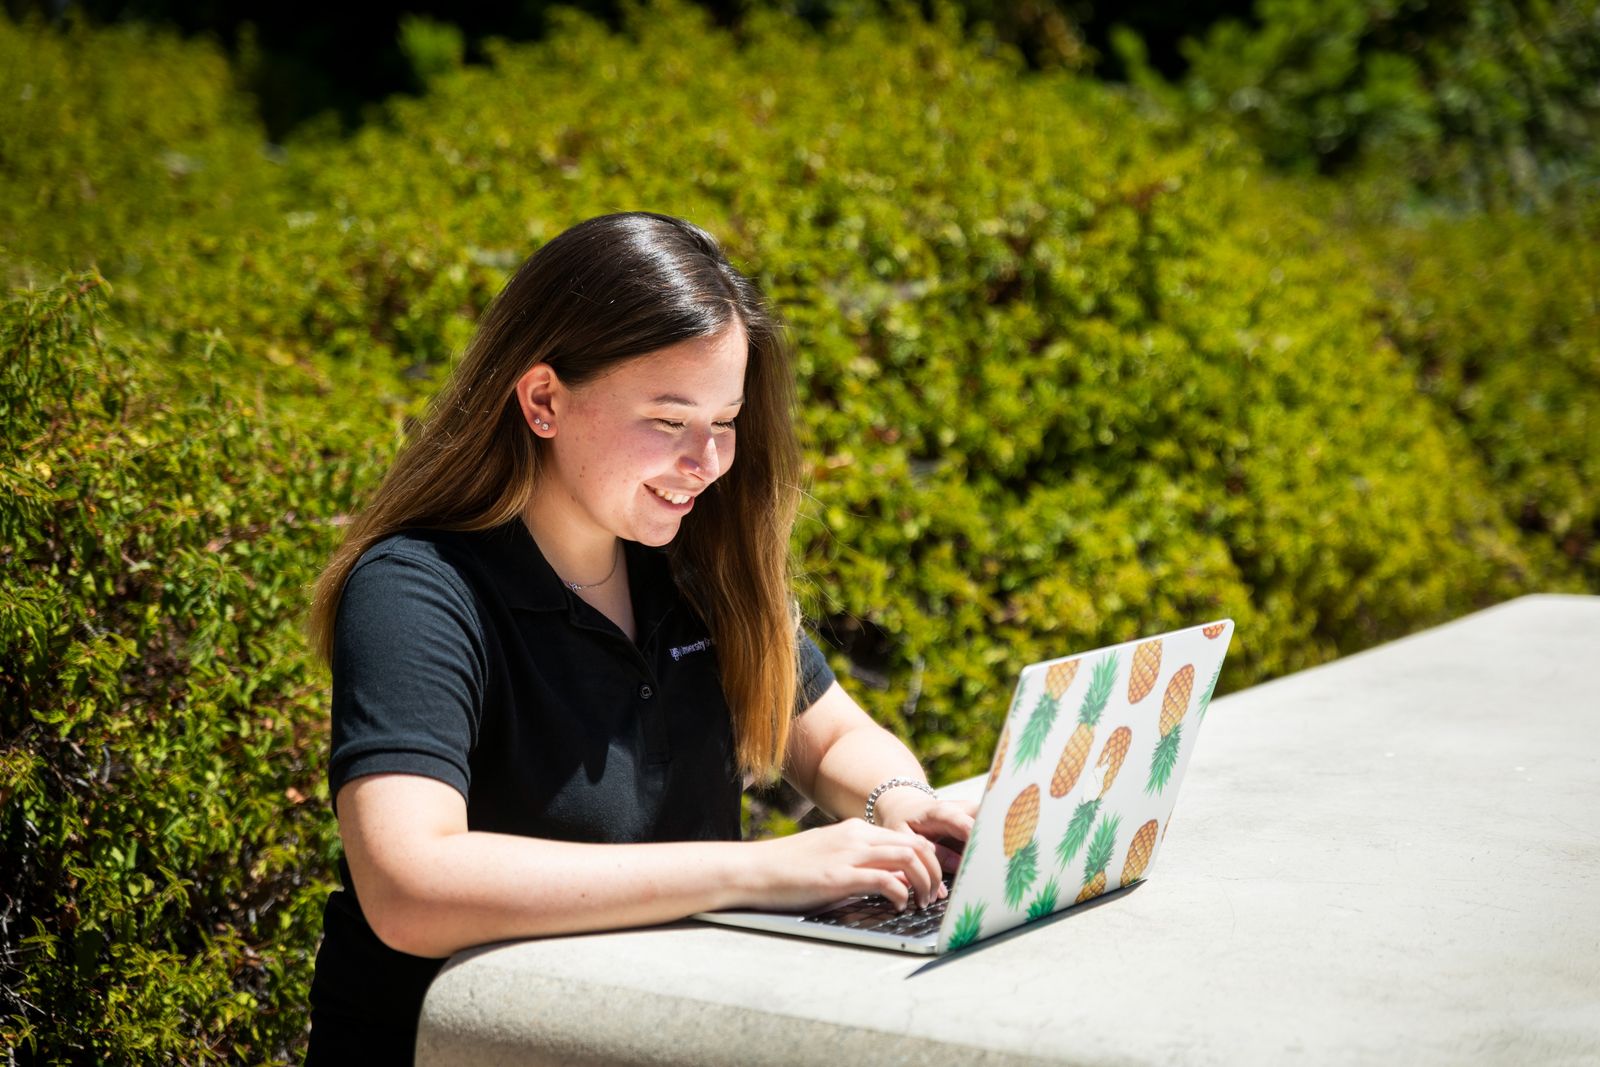 Student sits at a table outside working on a laptop